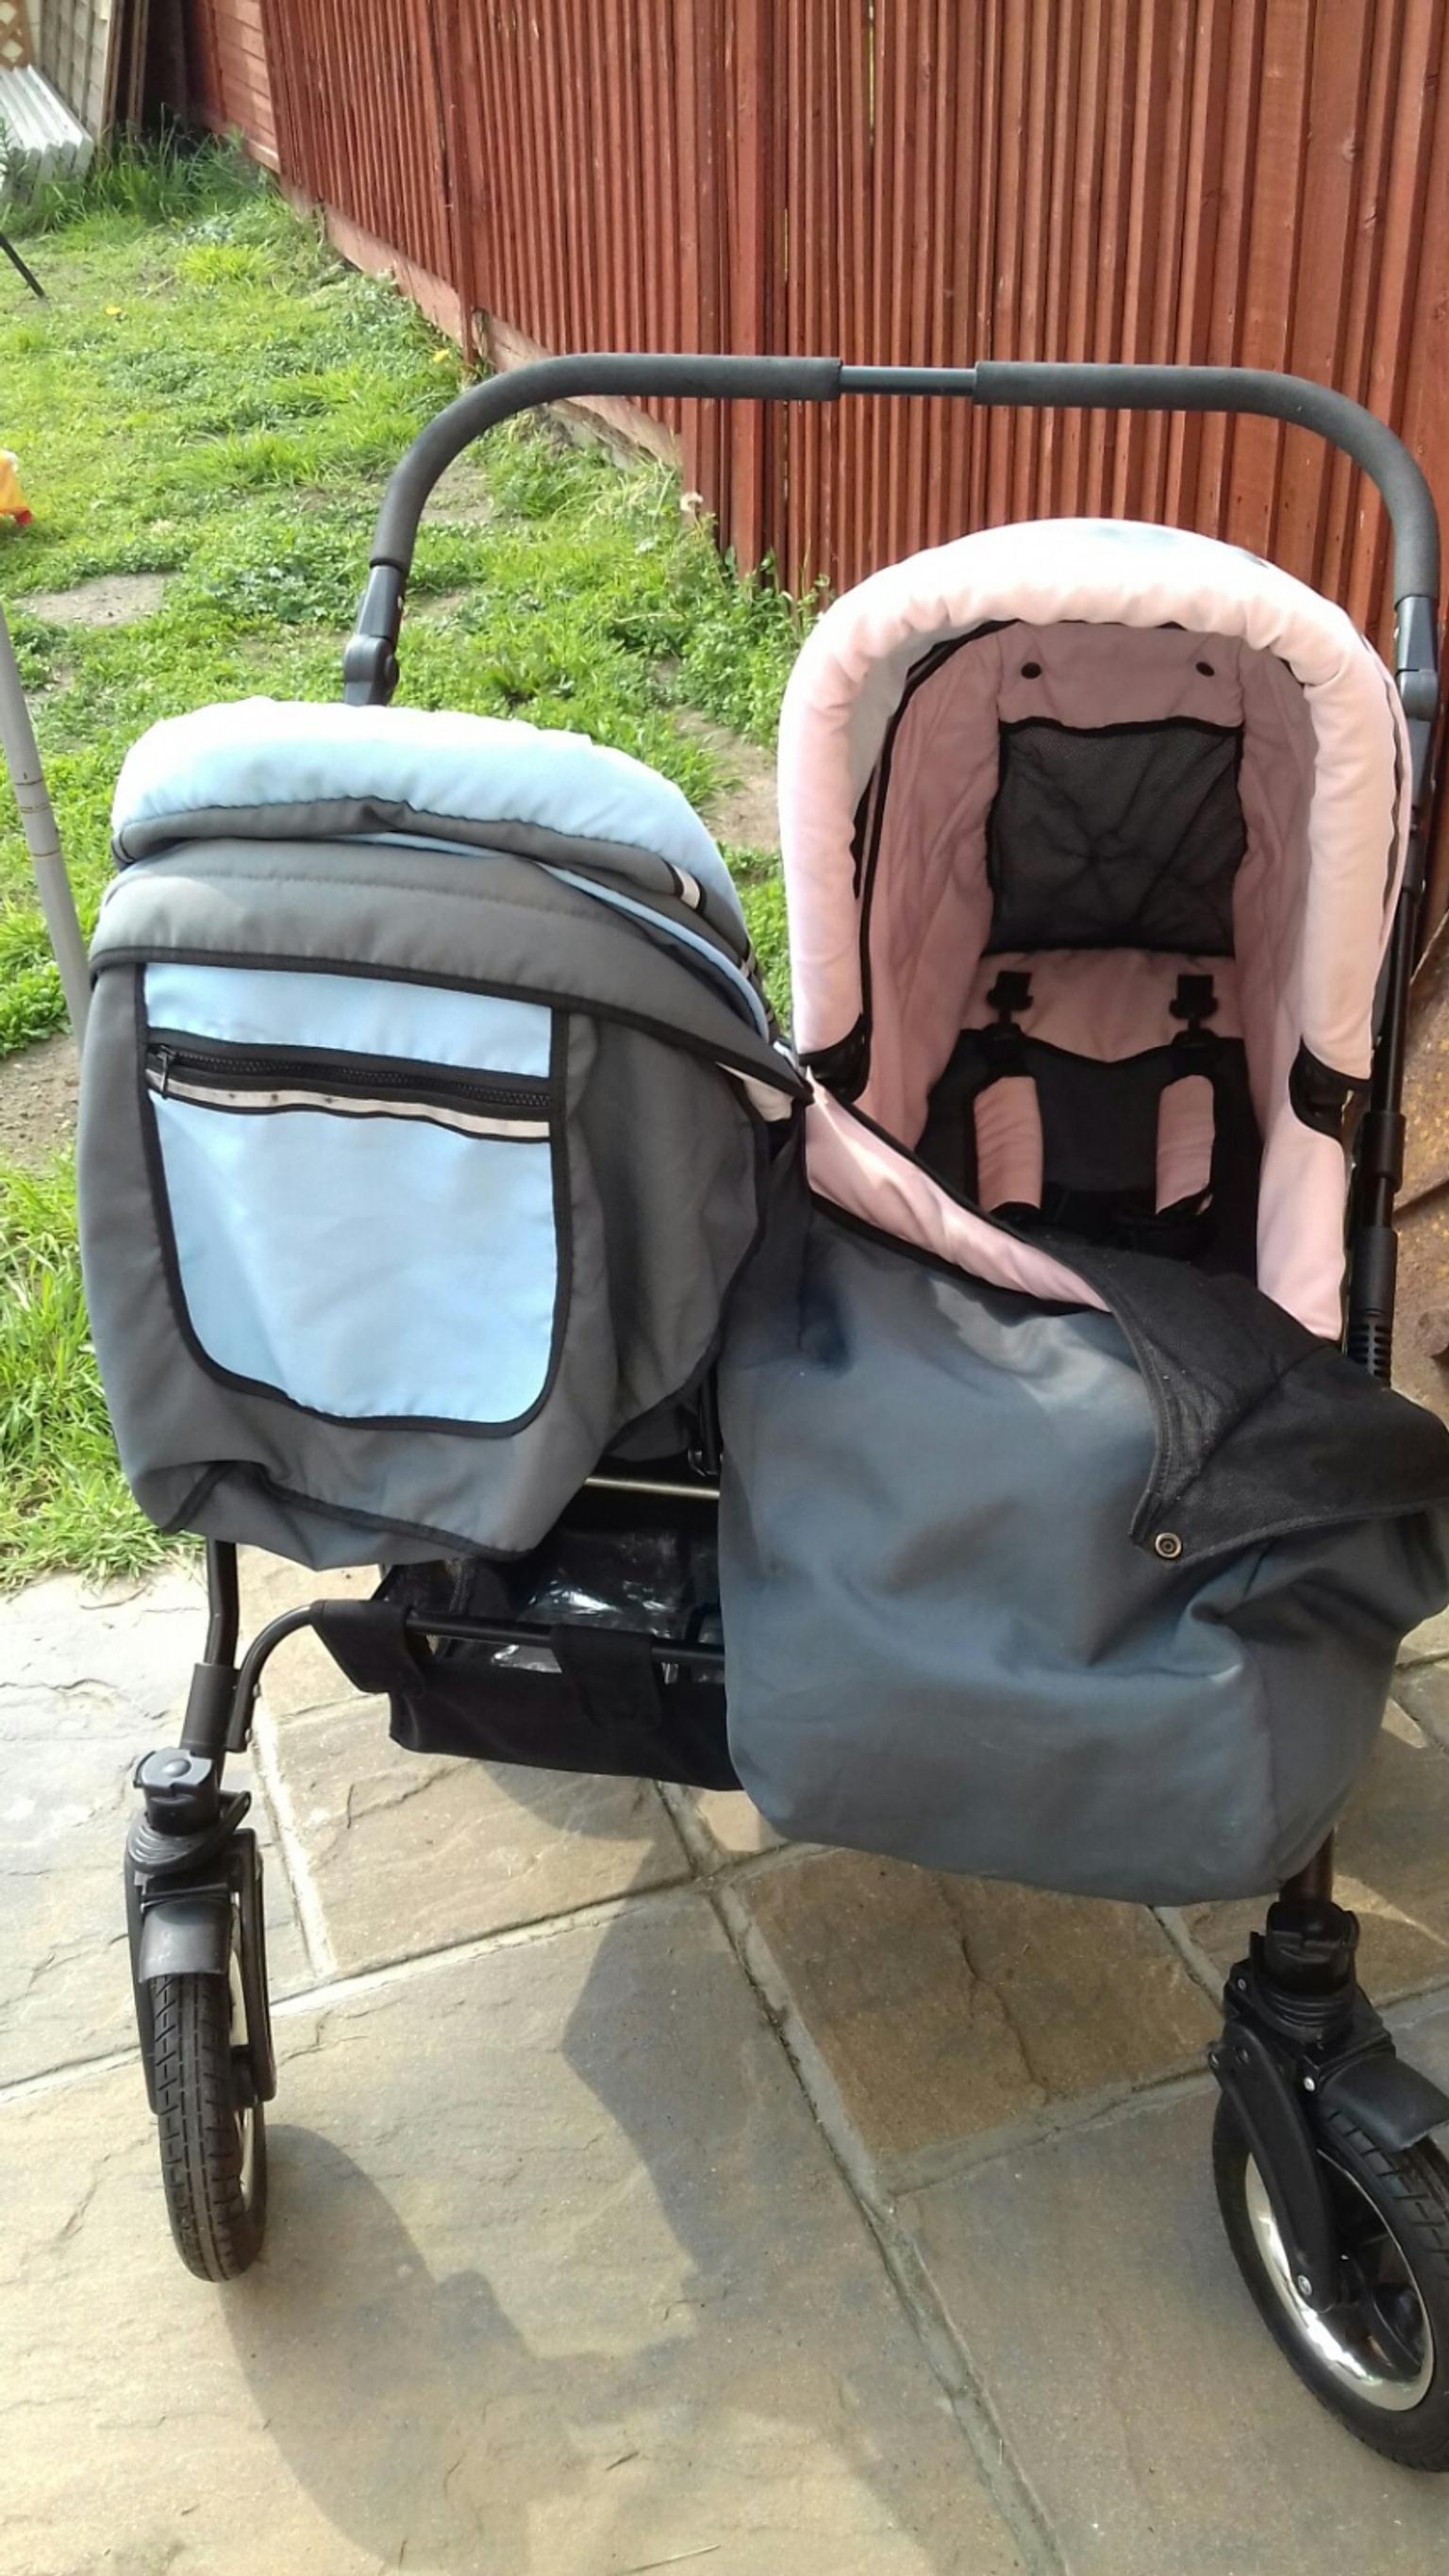 boy and girl double pushchair